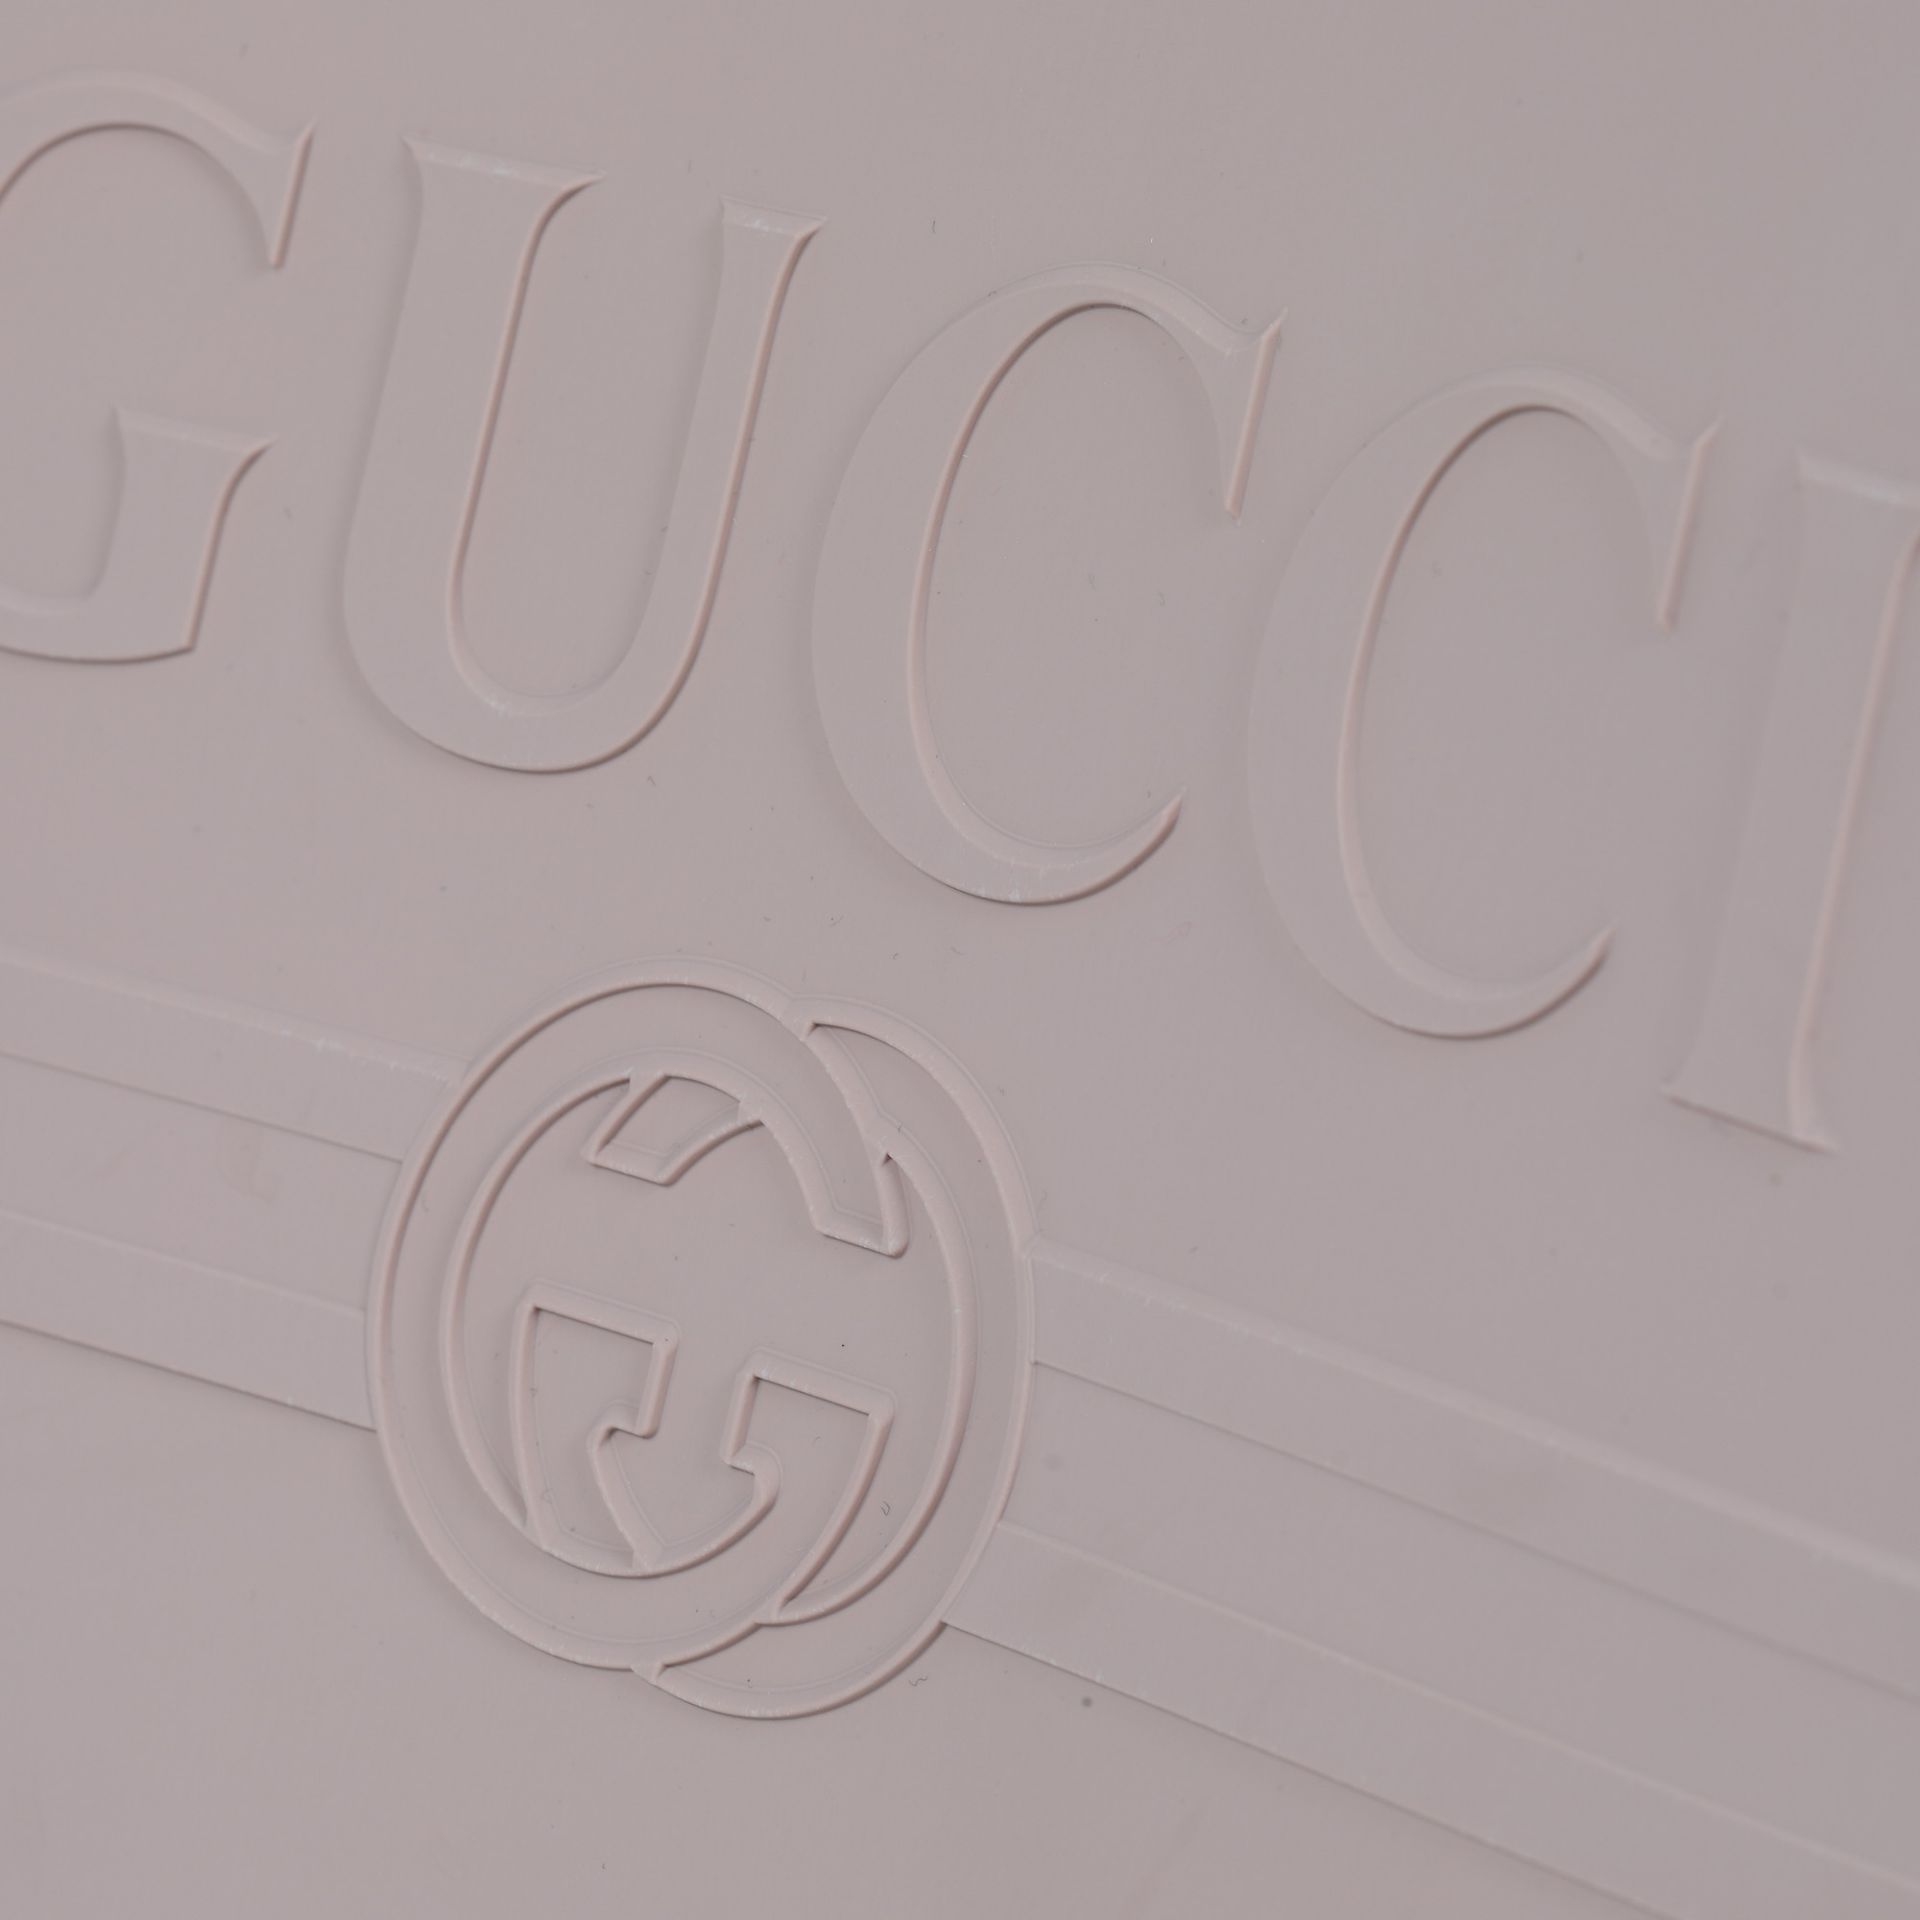 Gucci bag, rubber, millennial pink - Image 3 of 5